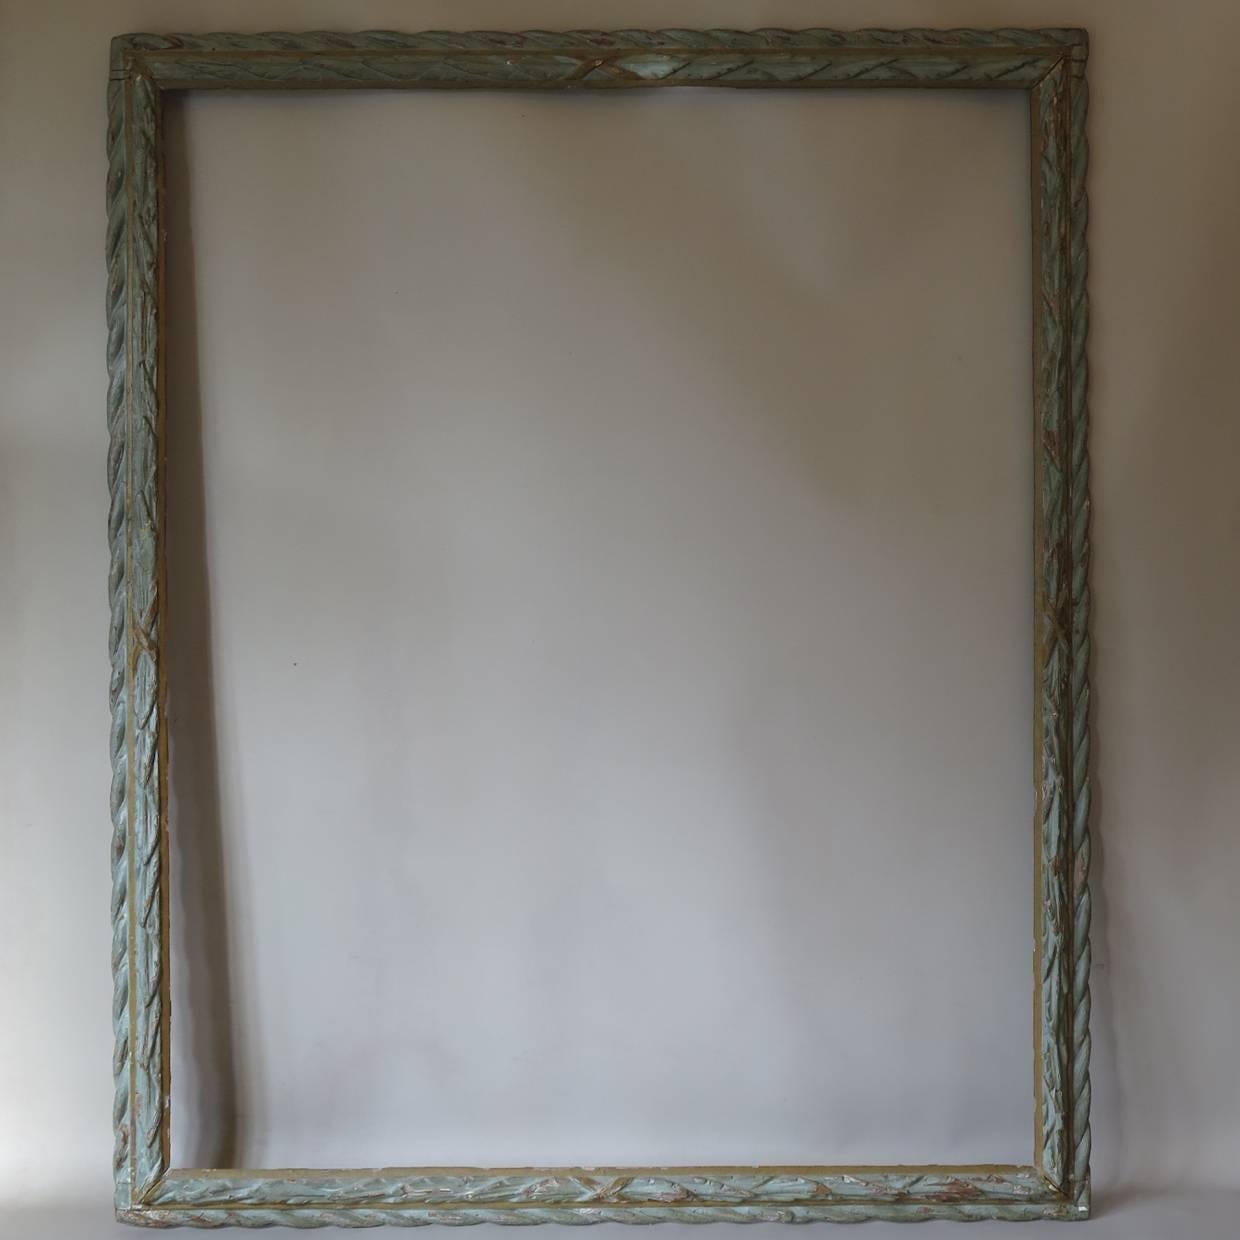 Beautiful large frame with a carved laurel leaf wreath motif, painted light green, with gold-colored crossed ribbons.